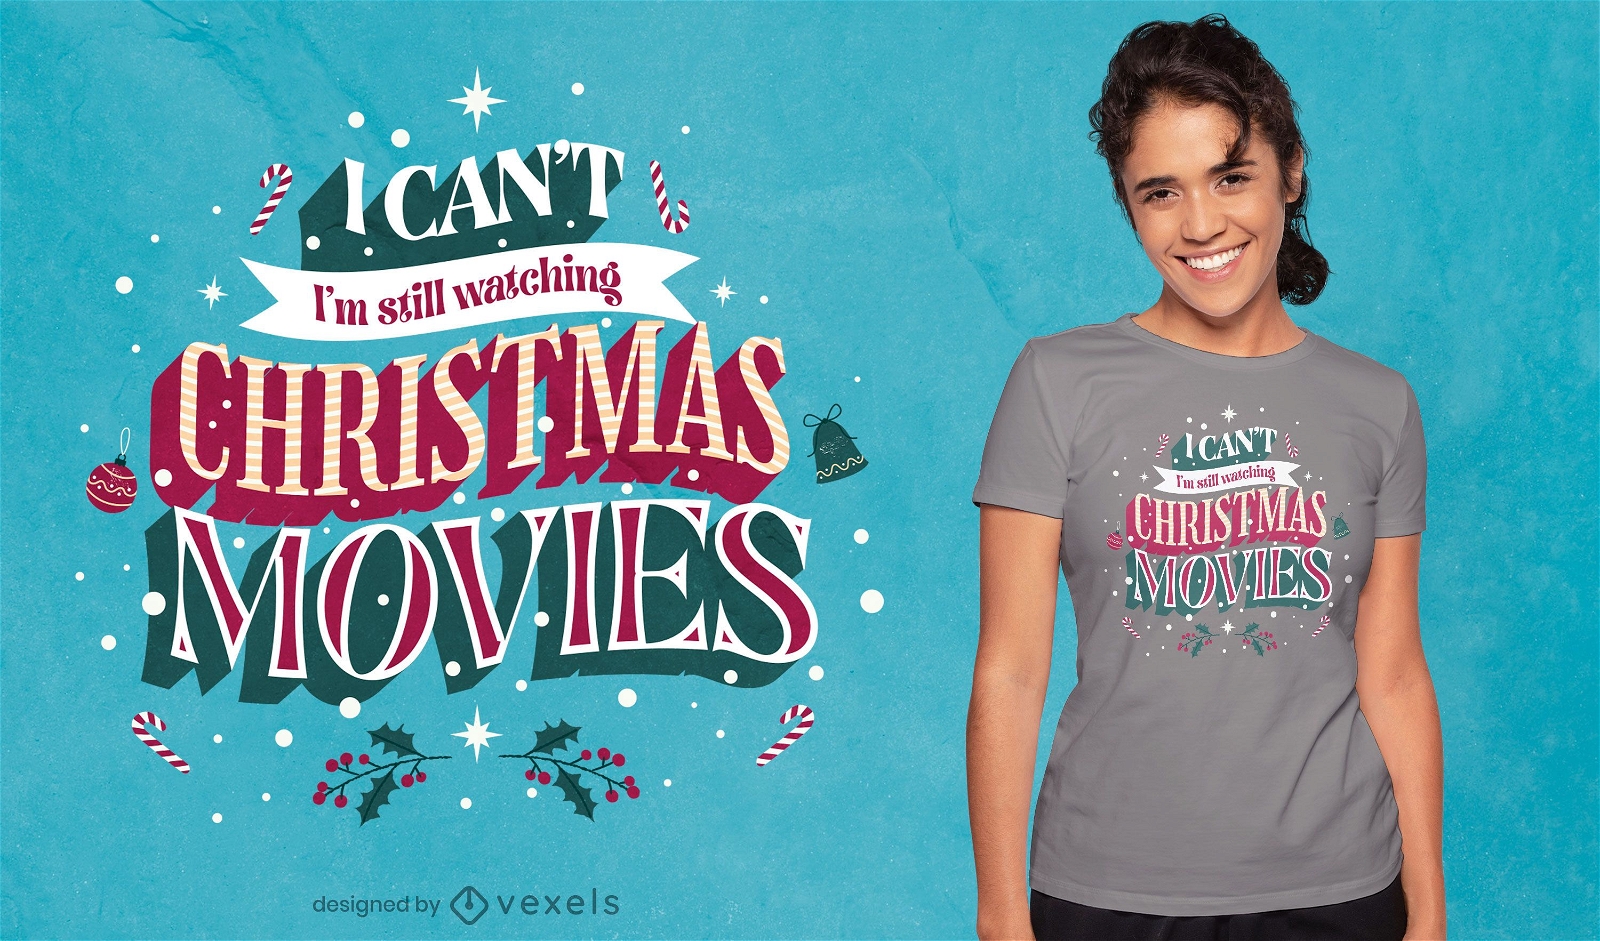 Christmas movies quote t-shirt design